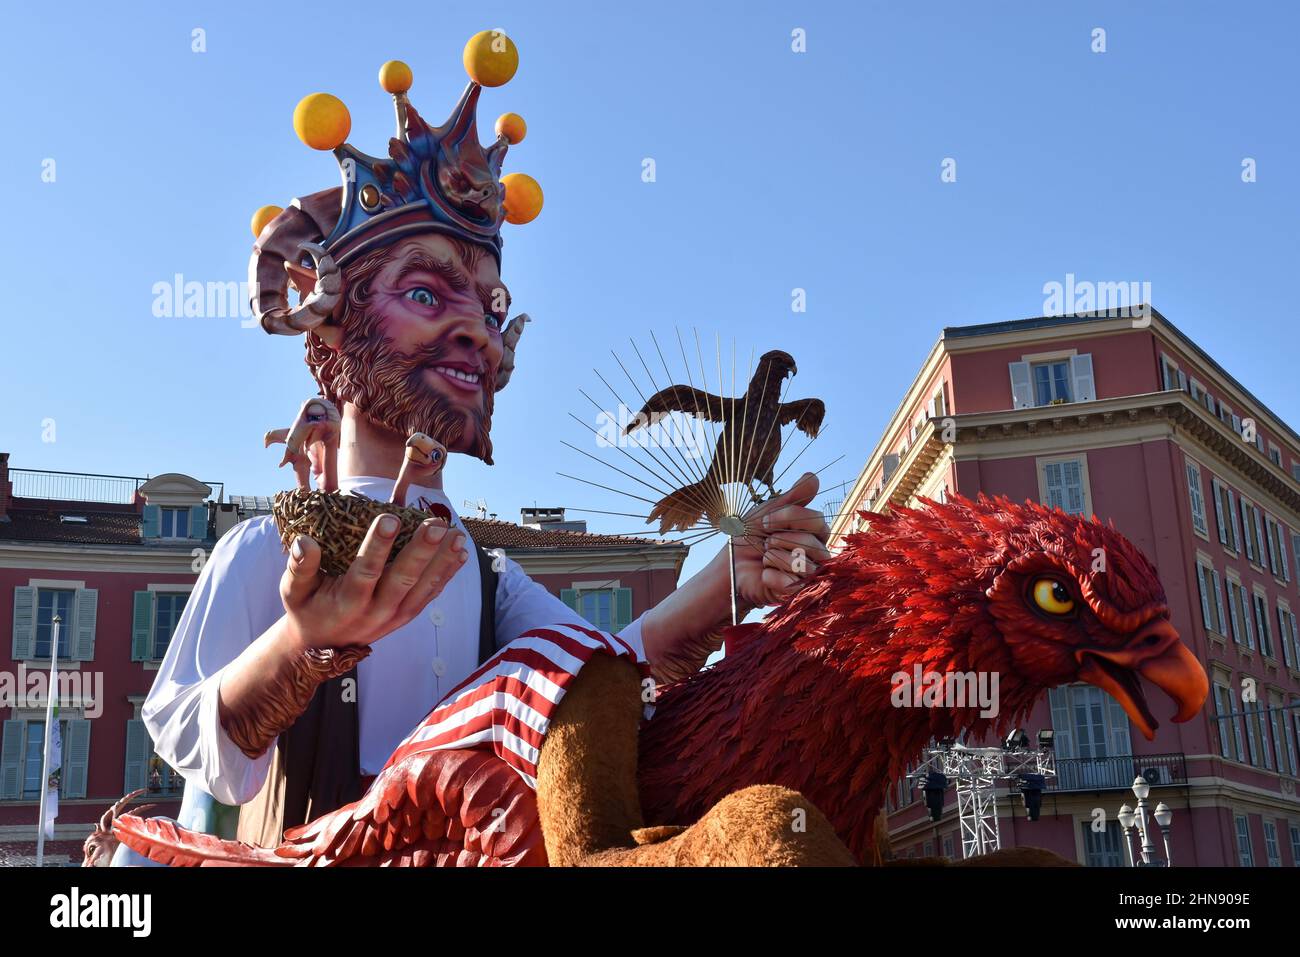 Europe, France, french riviera, Nice city, the famous float of King of carnival 2022 placed on the theme of animals. Stock Photo